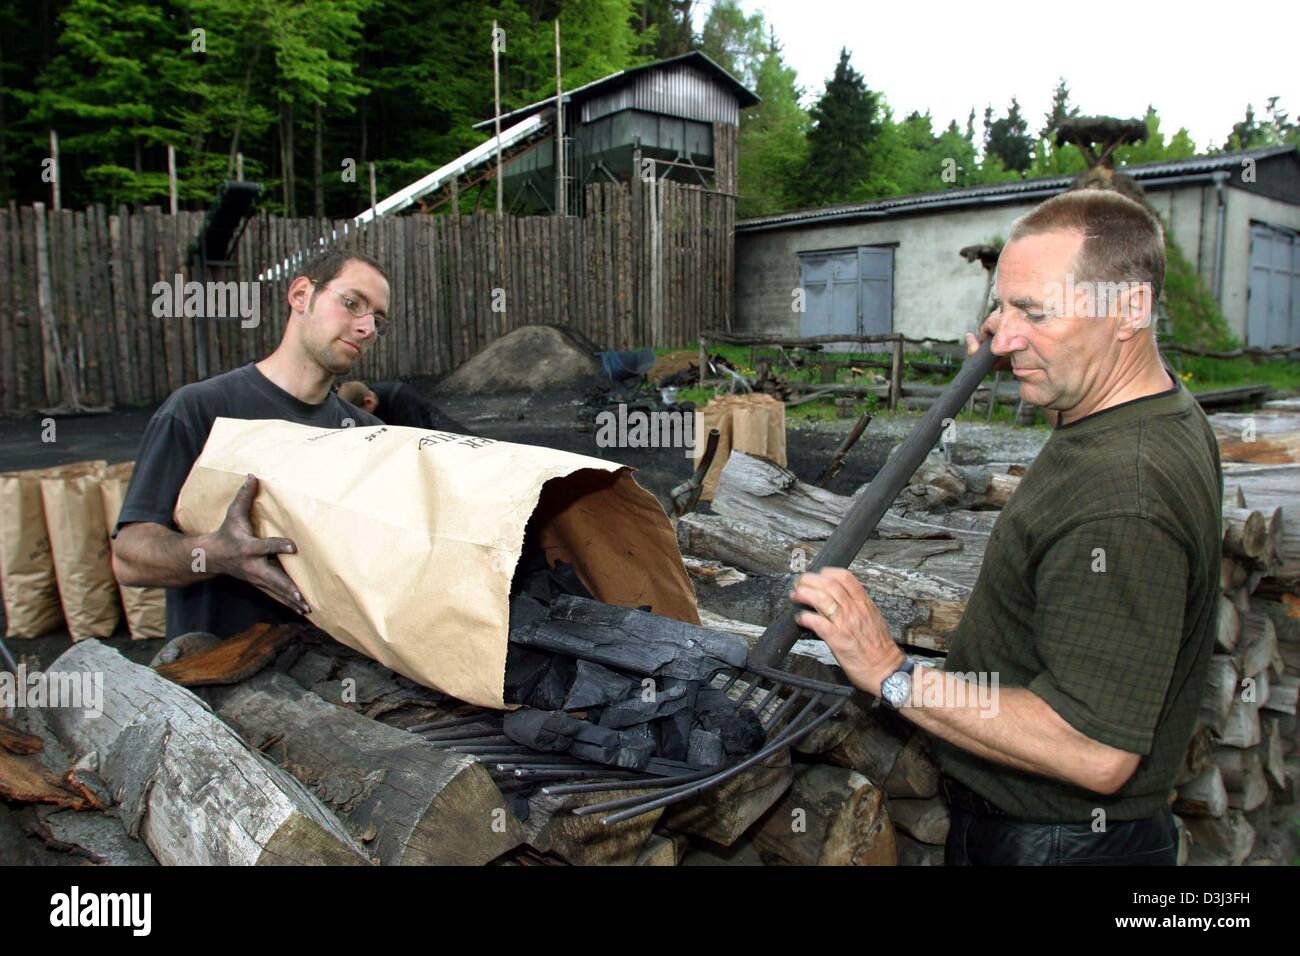 (dpa files) - Charburners Peter (R) and Sascha Feldmer fill the charcoal in paper bags on the compound of a charcoal plant in Hasselfelde, Germany, 16 May 2003. The charcoal plant is one of the last of its kind in Germany where charcoal is still produced in a traditional way. Stock Photo